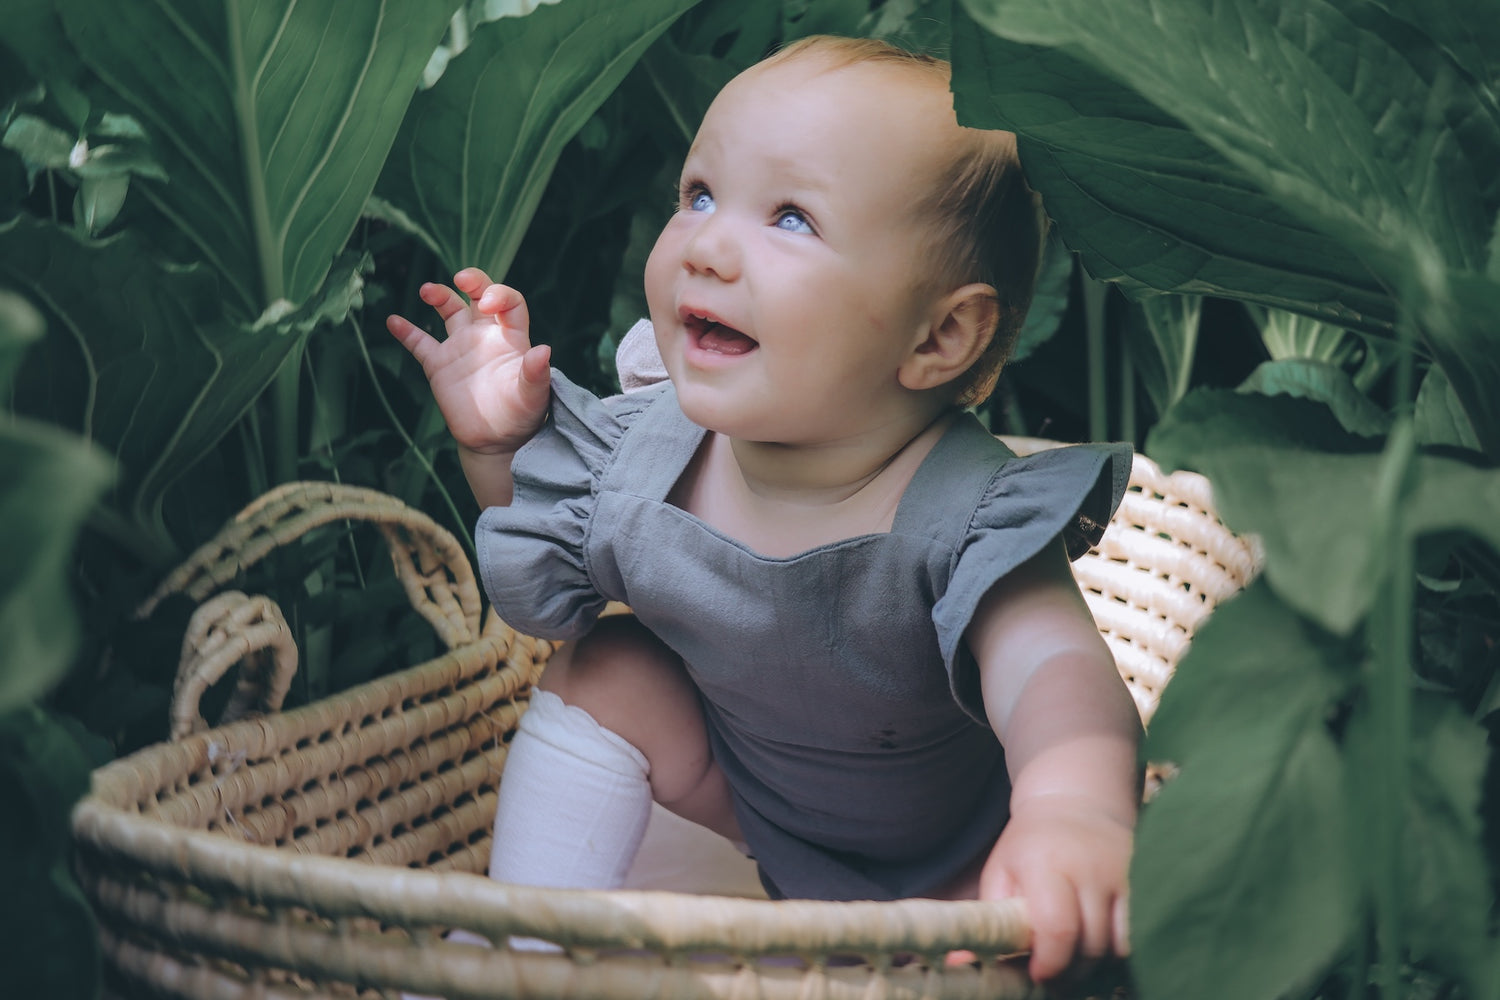 A smiling happy baby in a basket between greenery